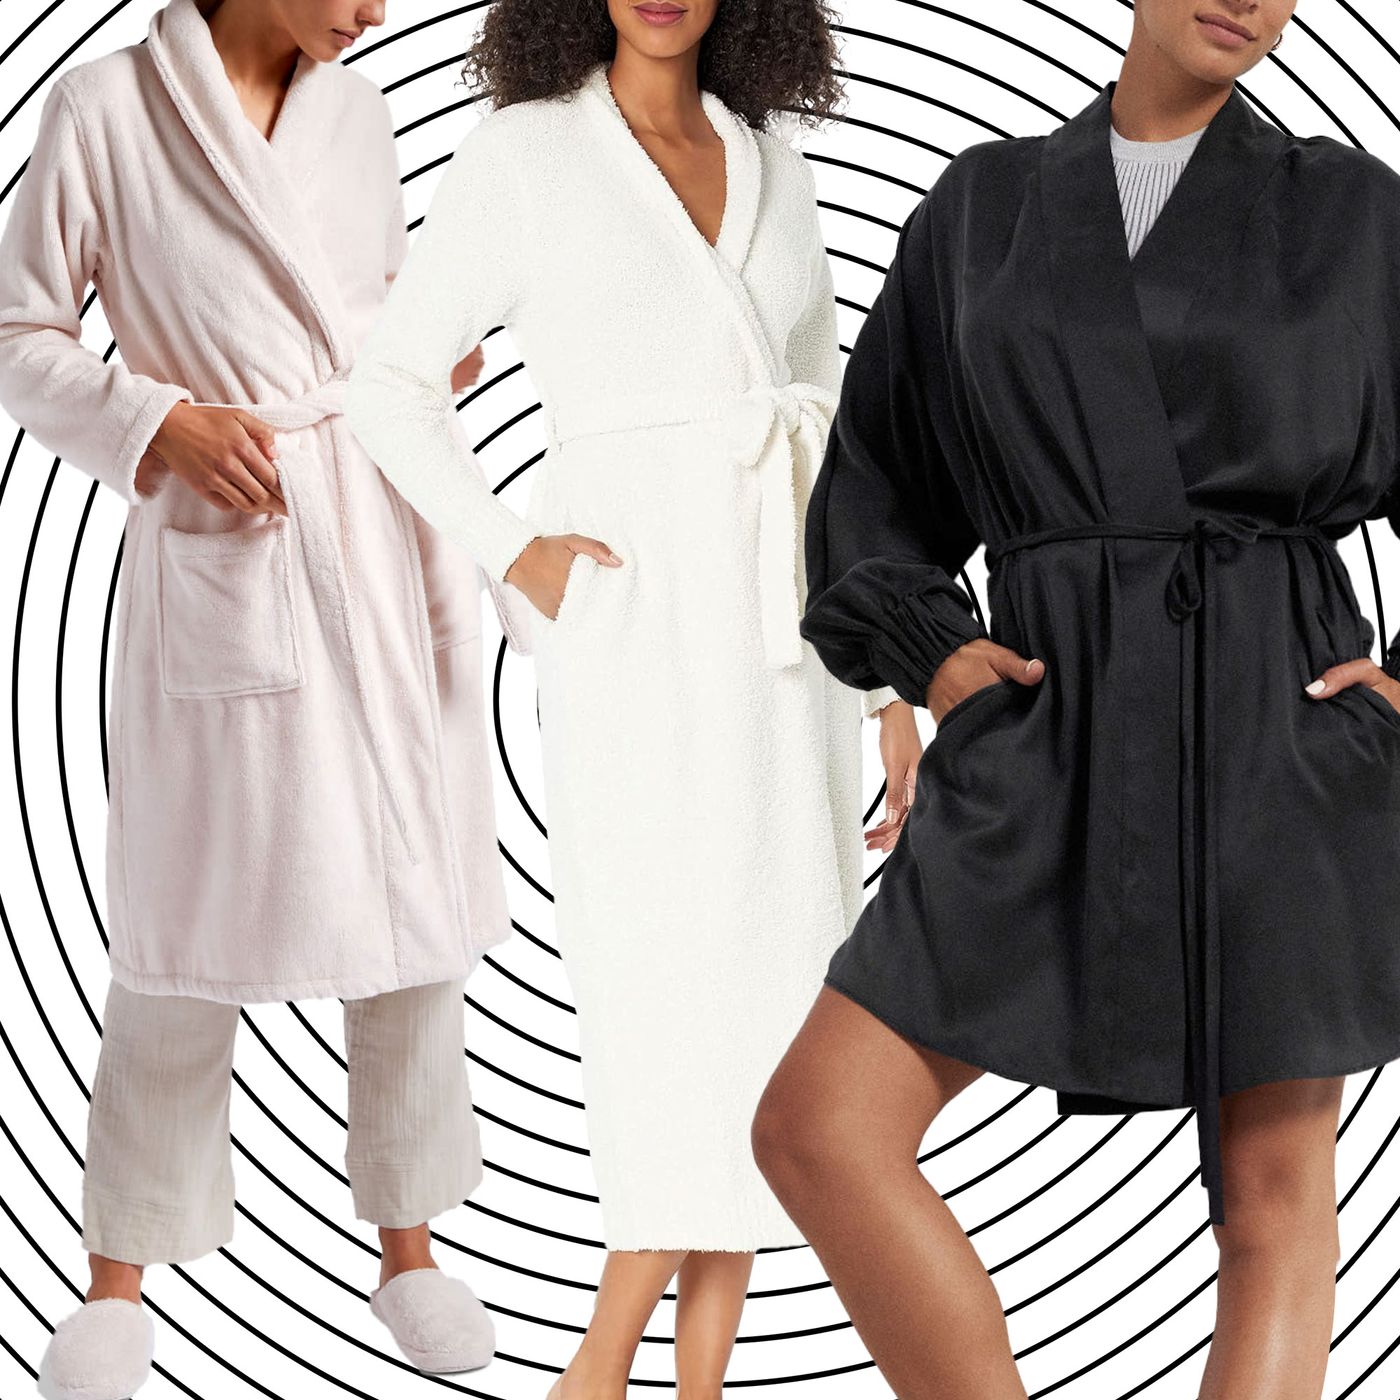 Best Organic Robes: What to Look for in an Organic Bathrobe